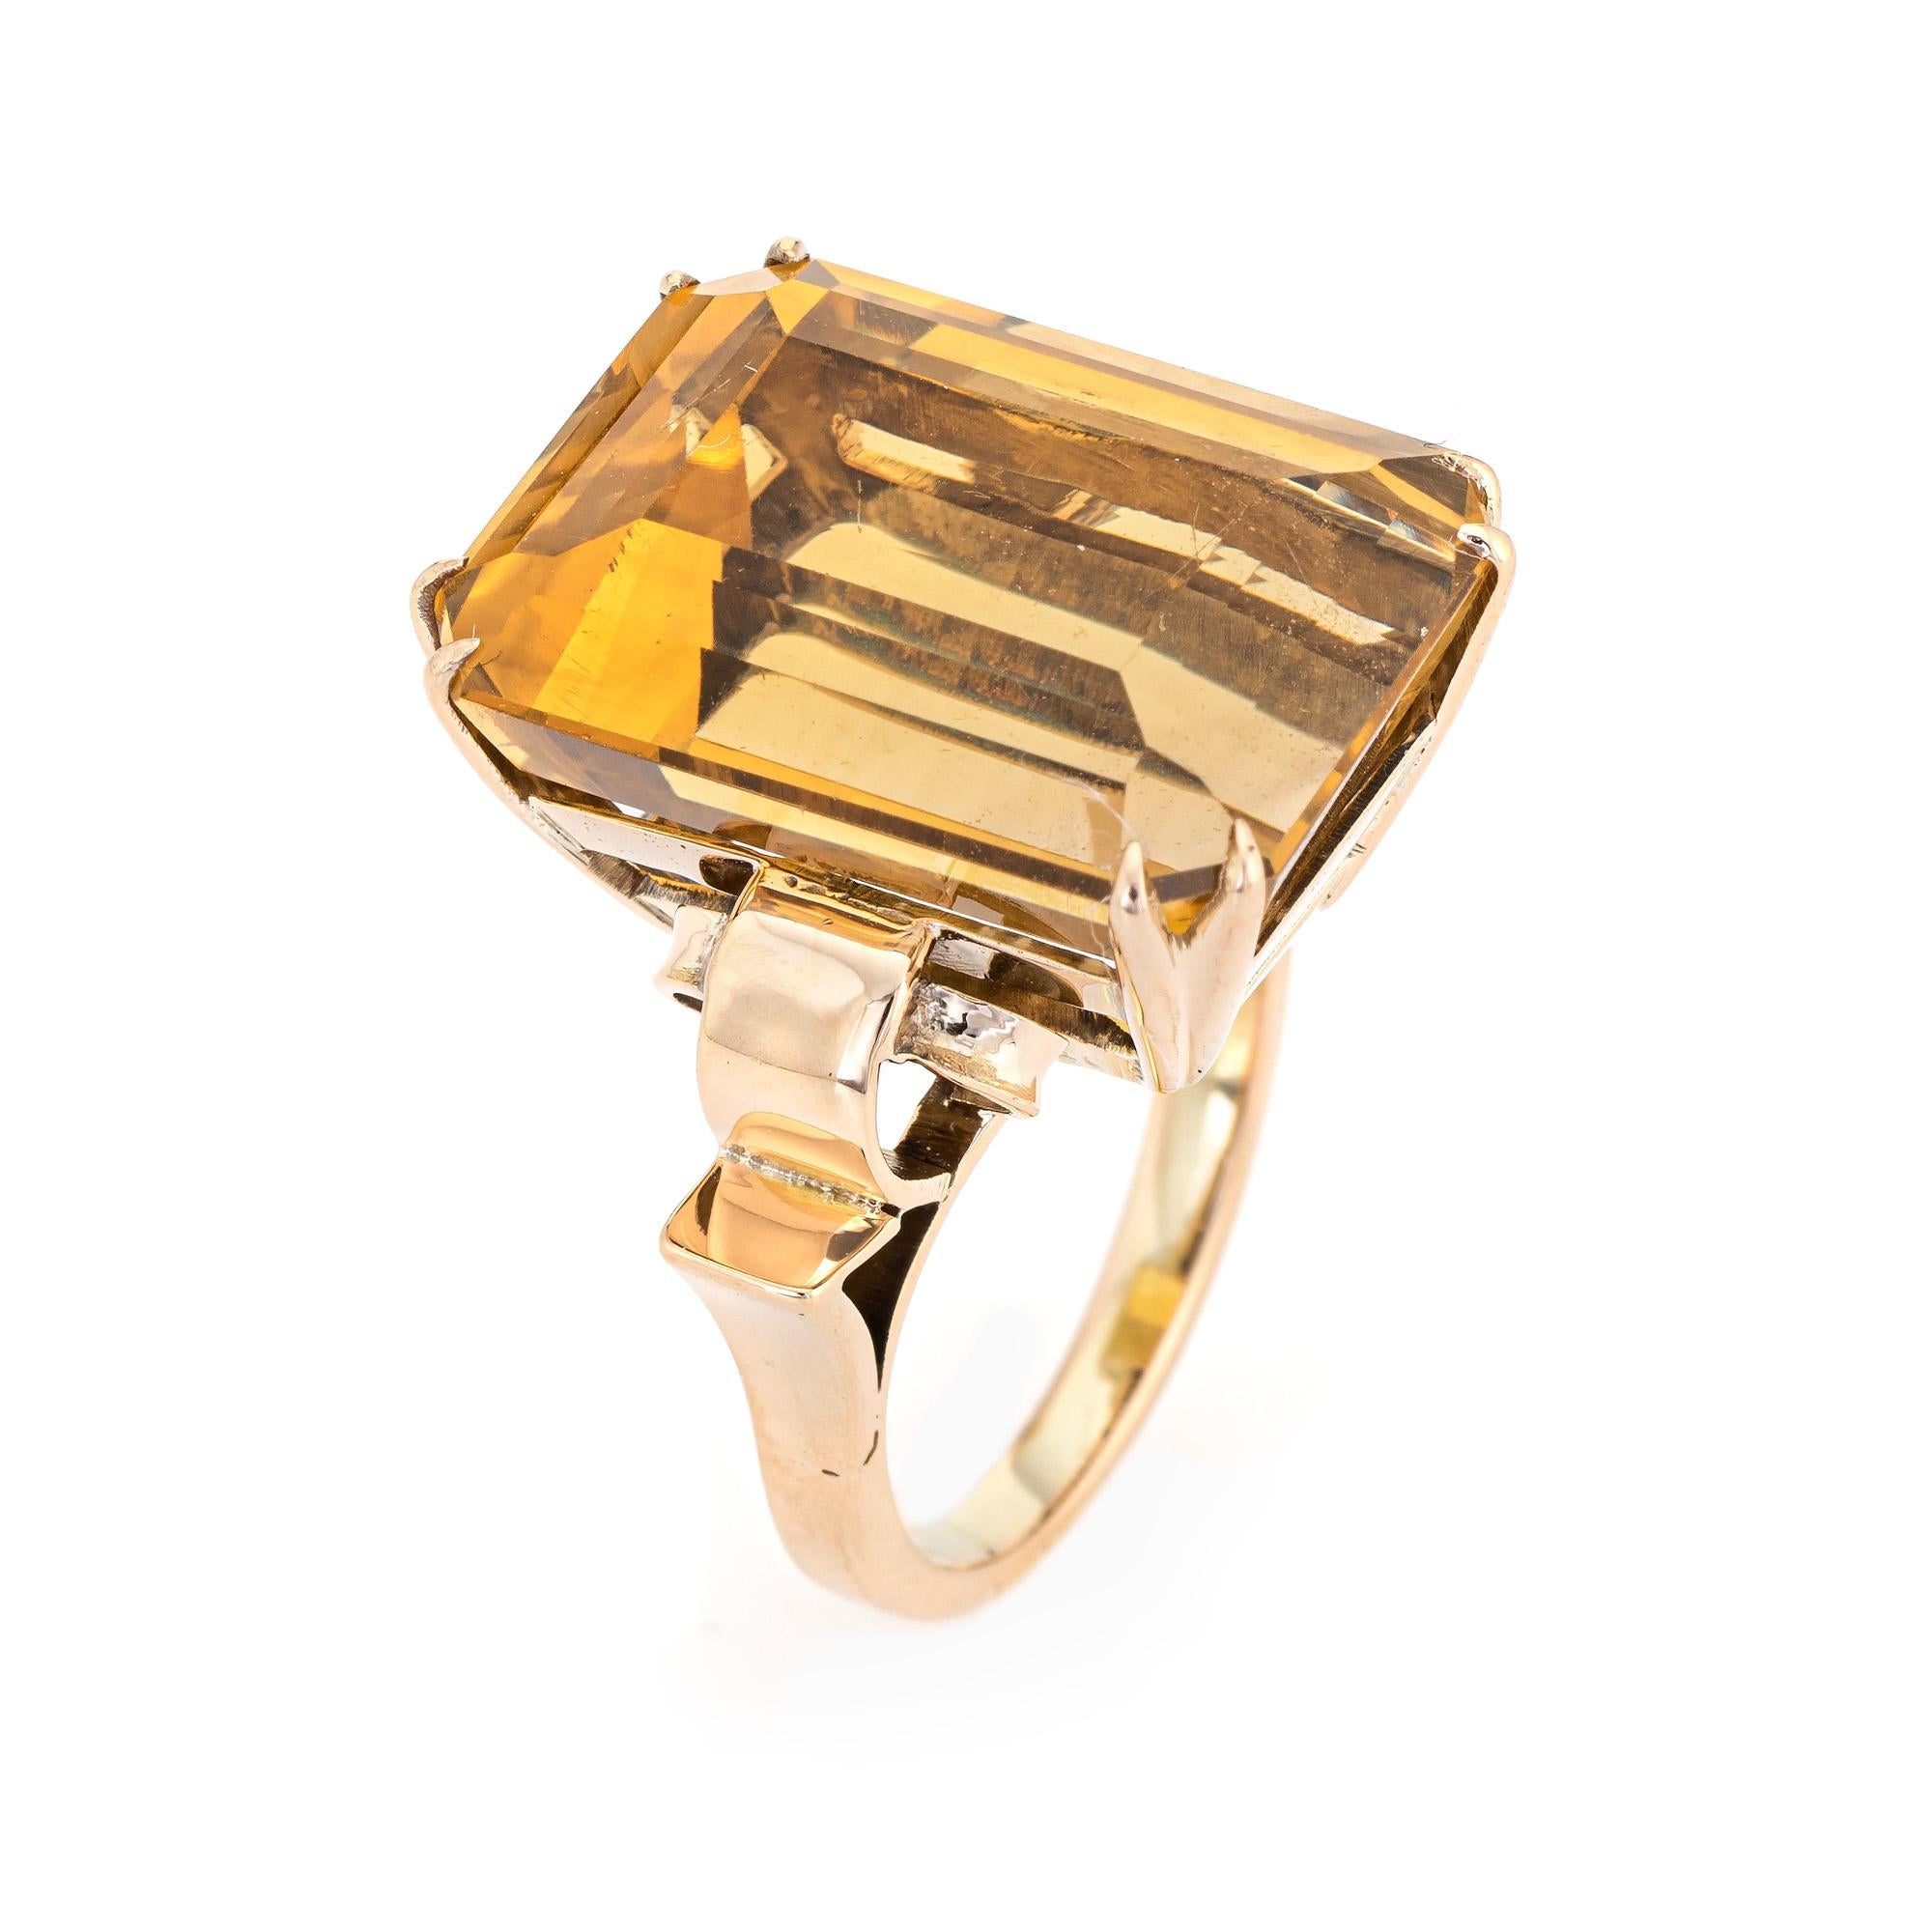 Stylish large estimated 23 carat citrine cocktail ring (circa 1940s to 1950s) crafted in 14 karat yellow gold. 

Emerald cut citrine measures 20mm x 15mm (estimated at 23 carats). The citrine is in very good condition and free of cracks or chips. 